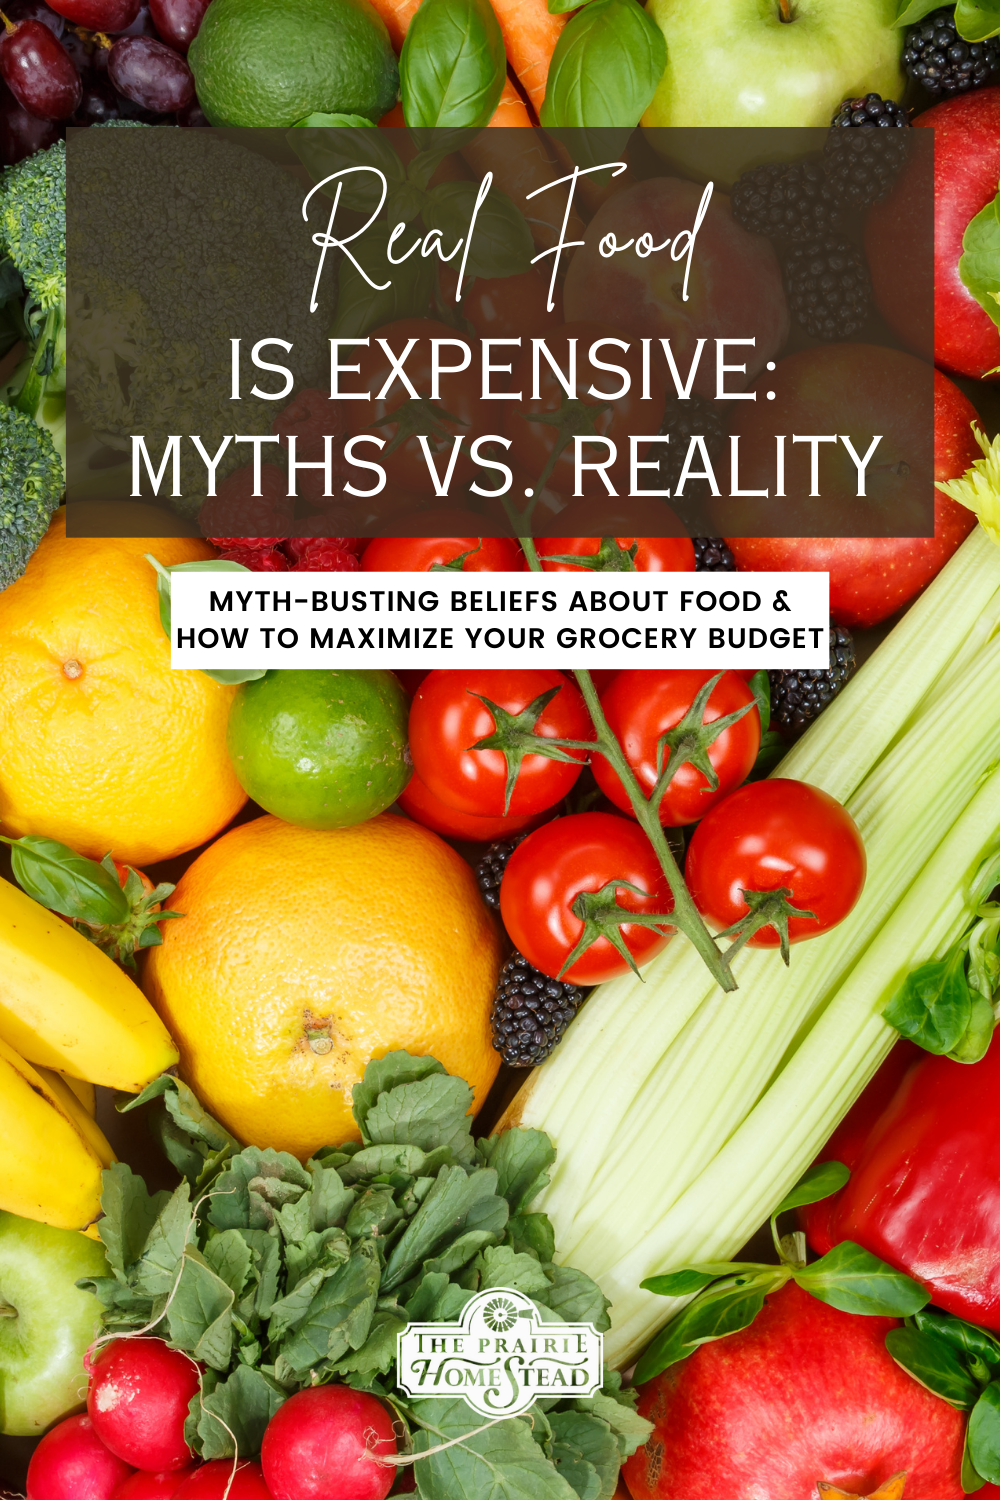 Real Food is Expensive: Myths vs. Reality